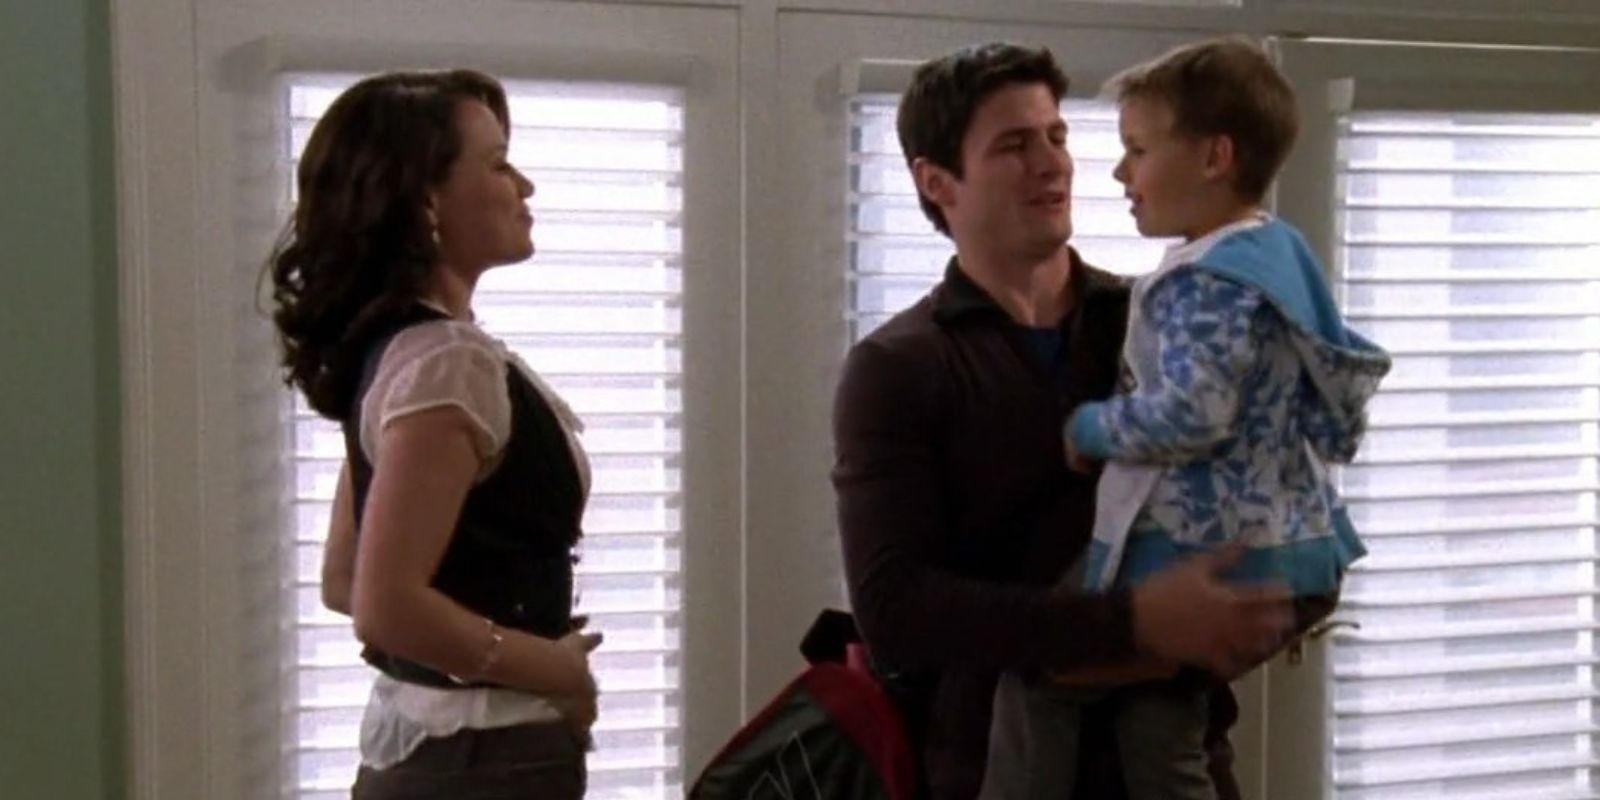 Haley looks over at Nathan holding Jamie